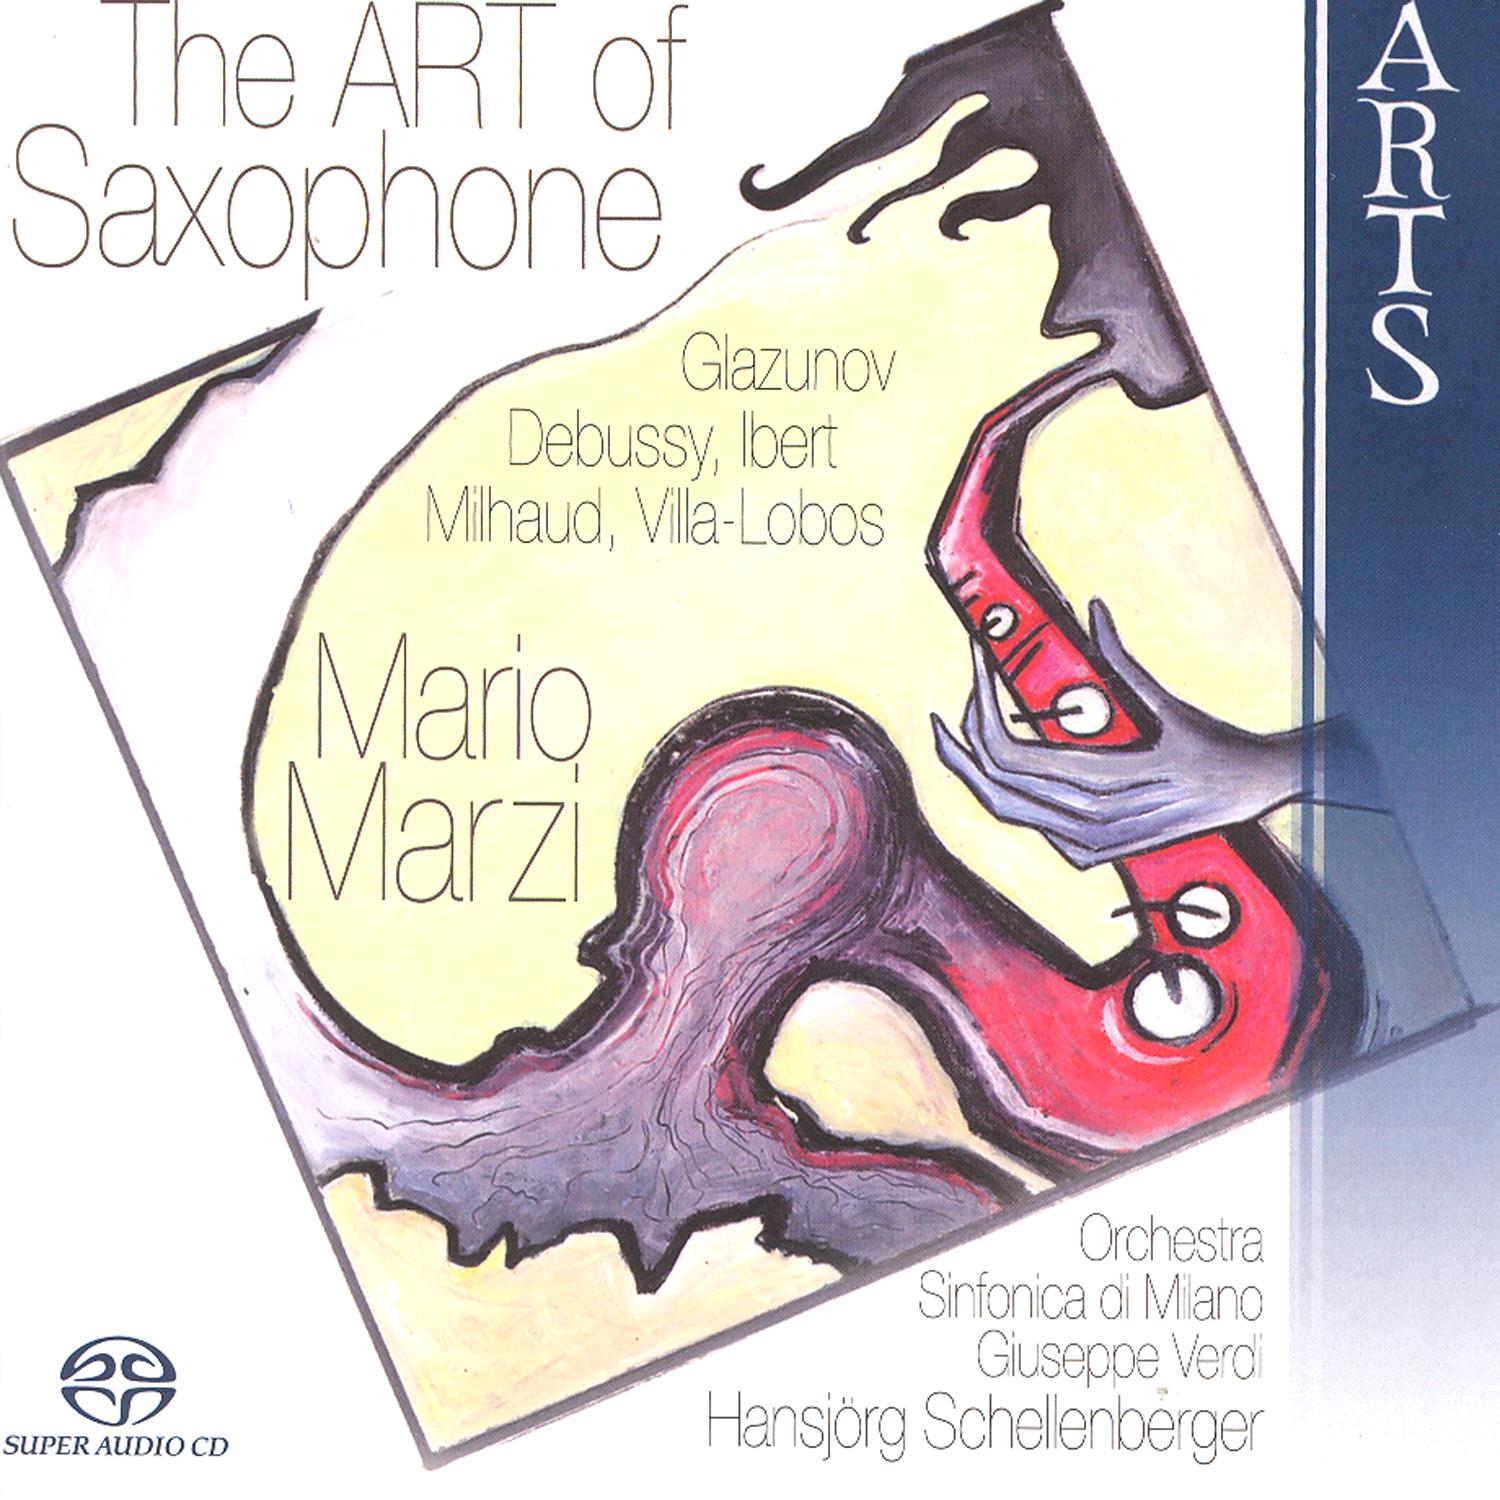 Concerto in E flat major for alto saxophone and strings op. 109: Allegro